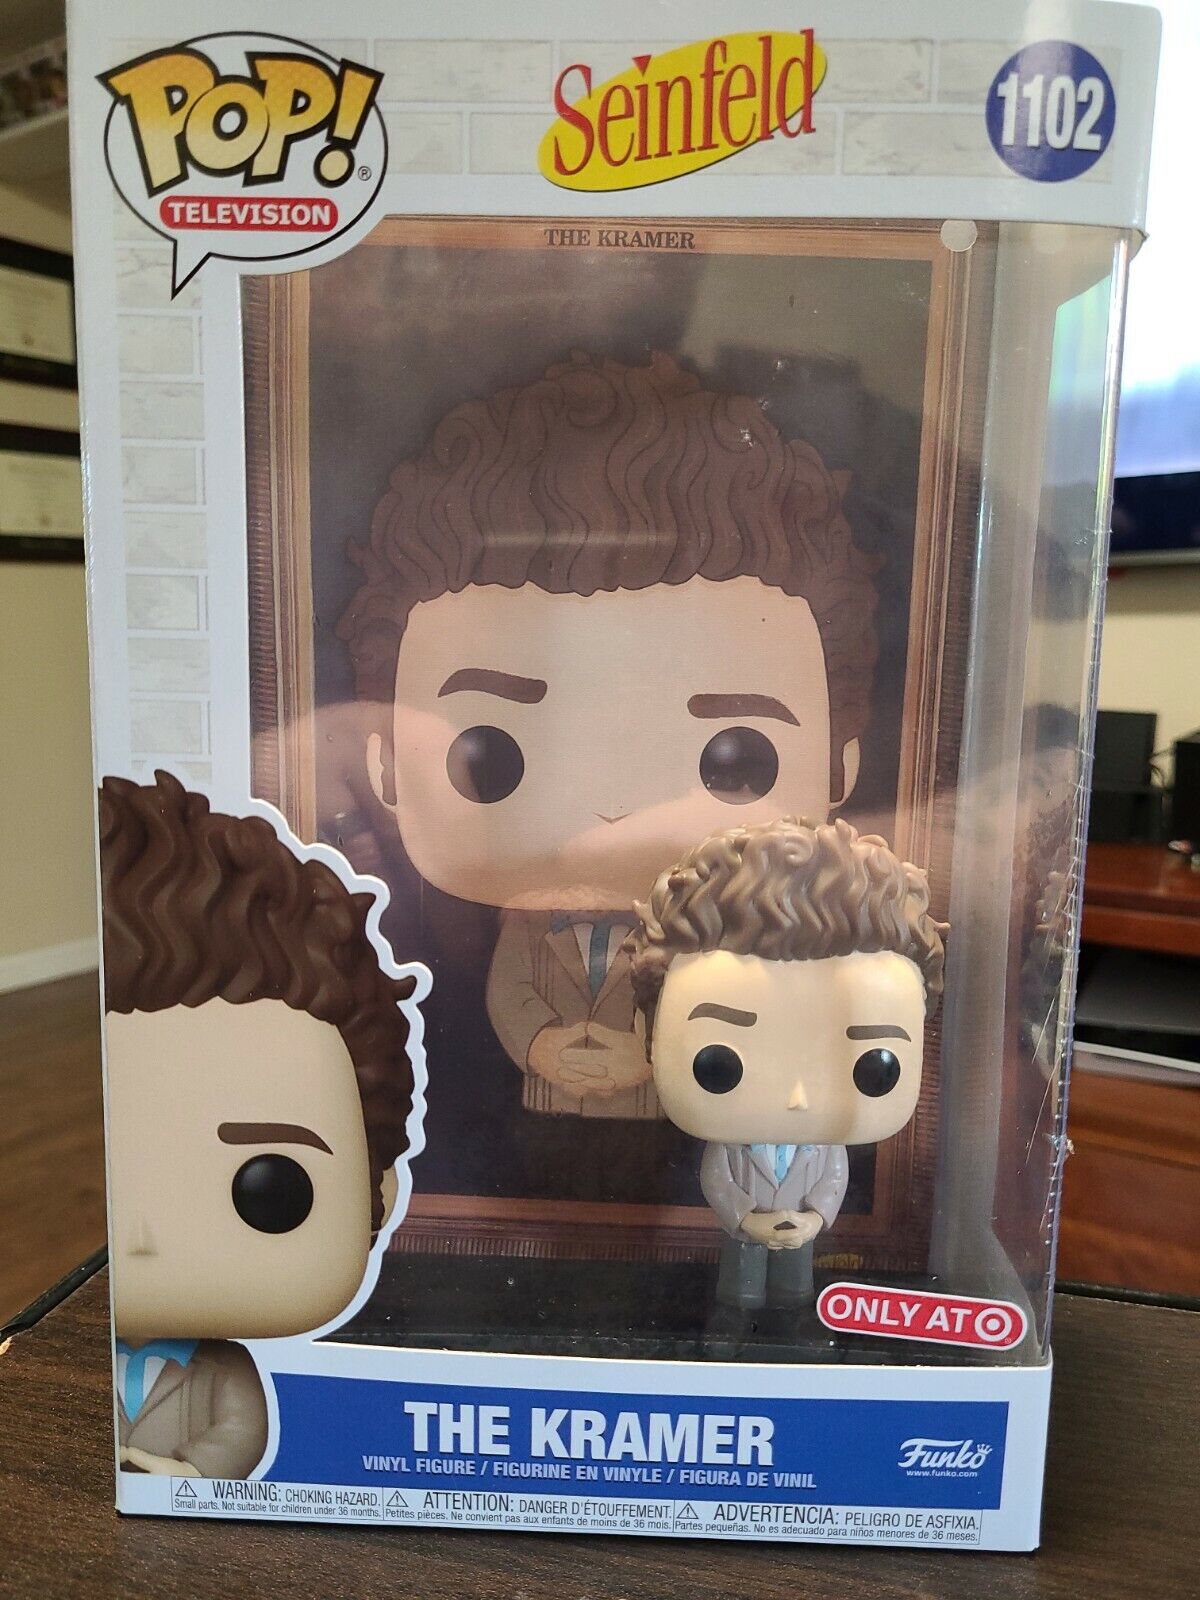 Funko POP New Sealed Target Exclusive Television Seinfeld The Kramer #1102 